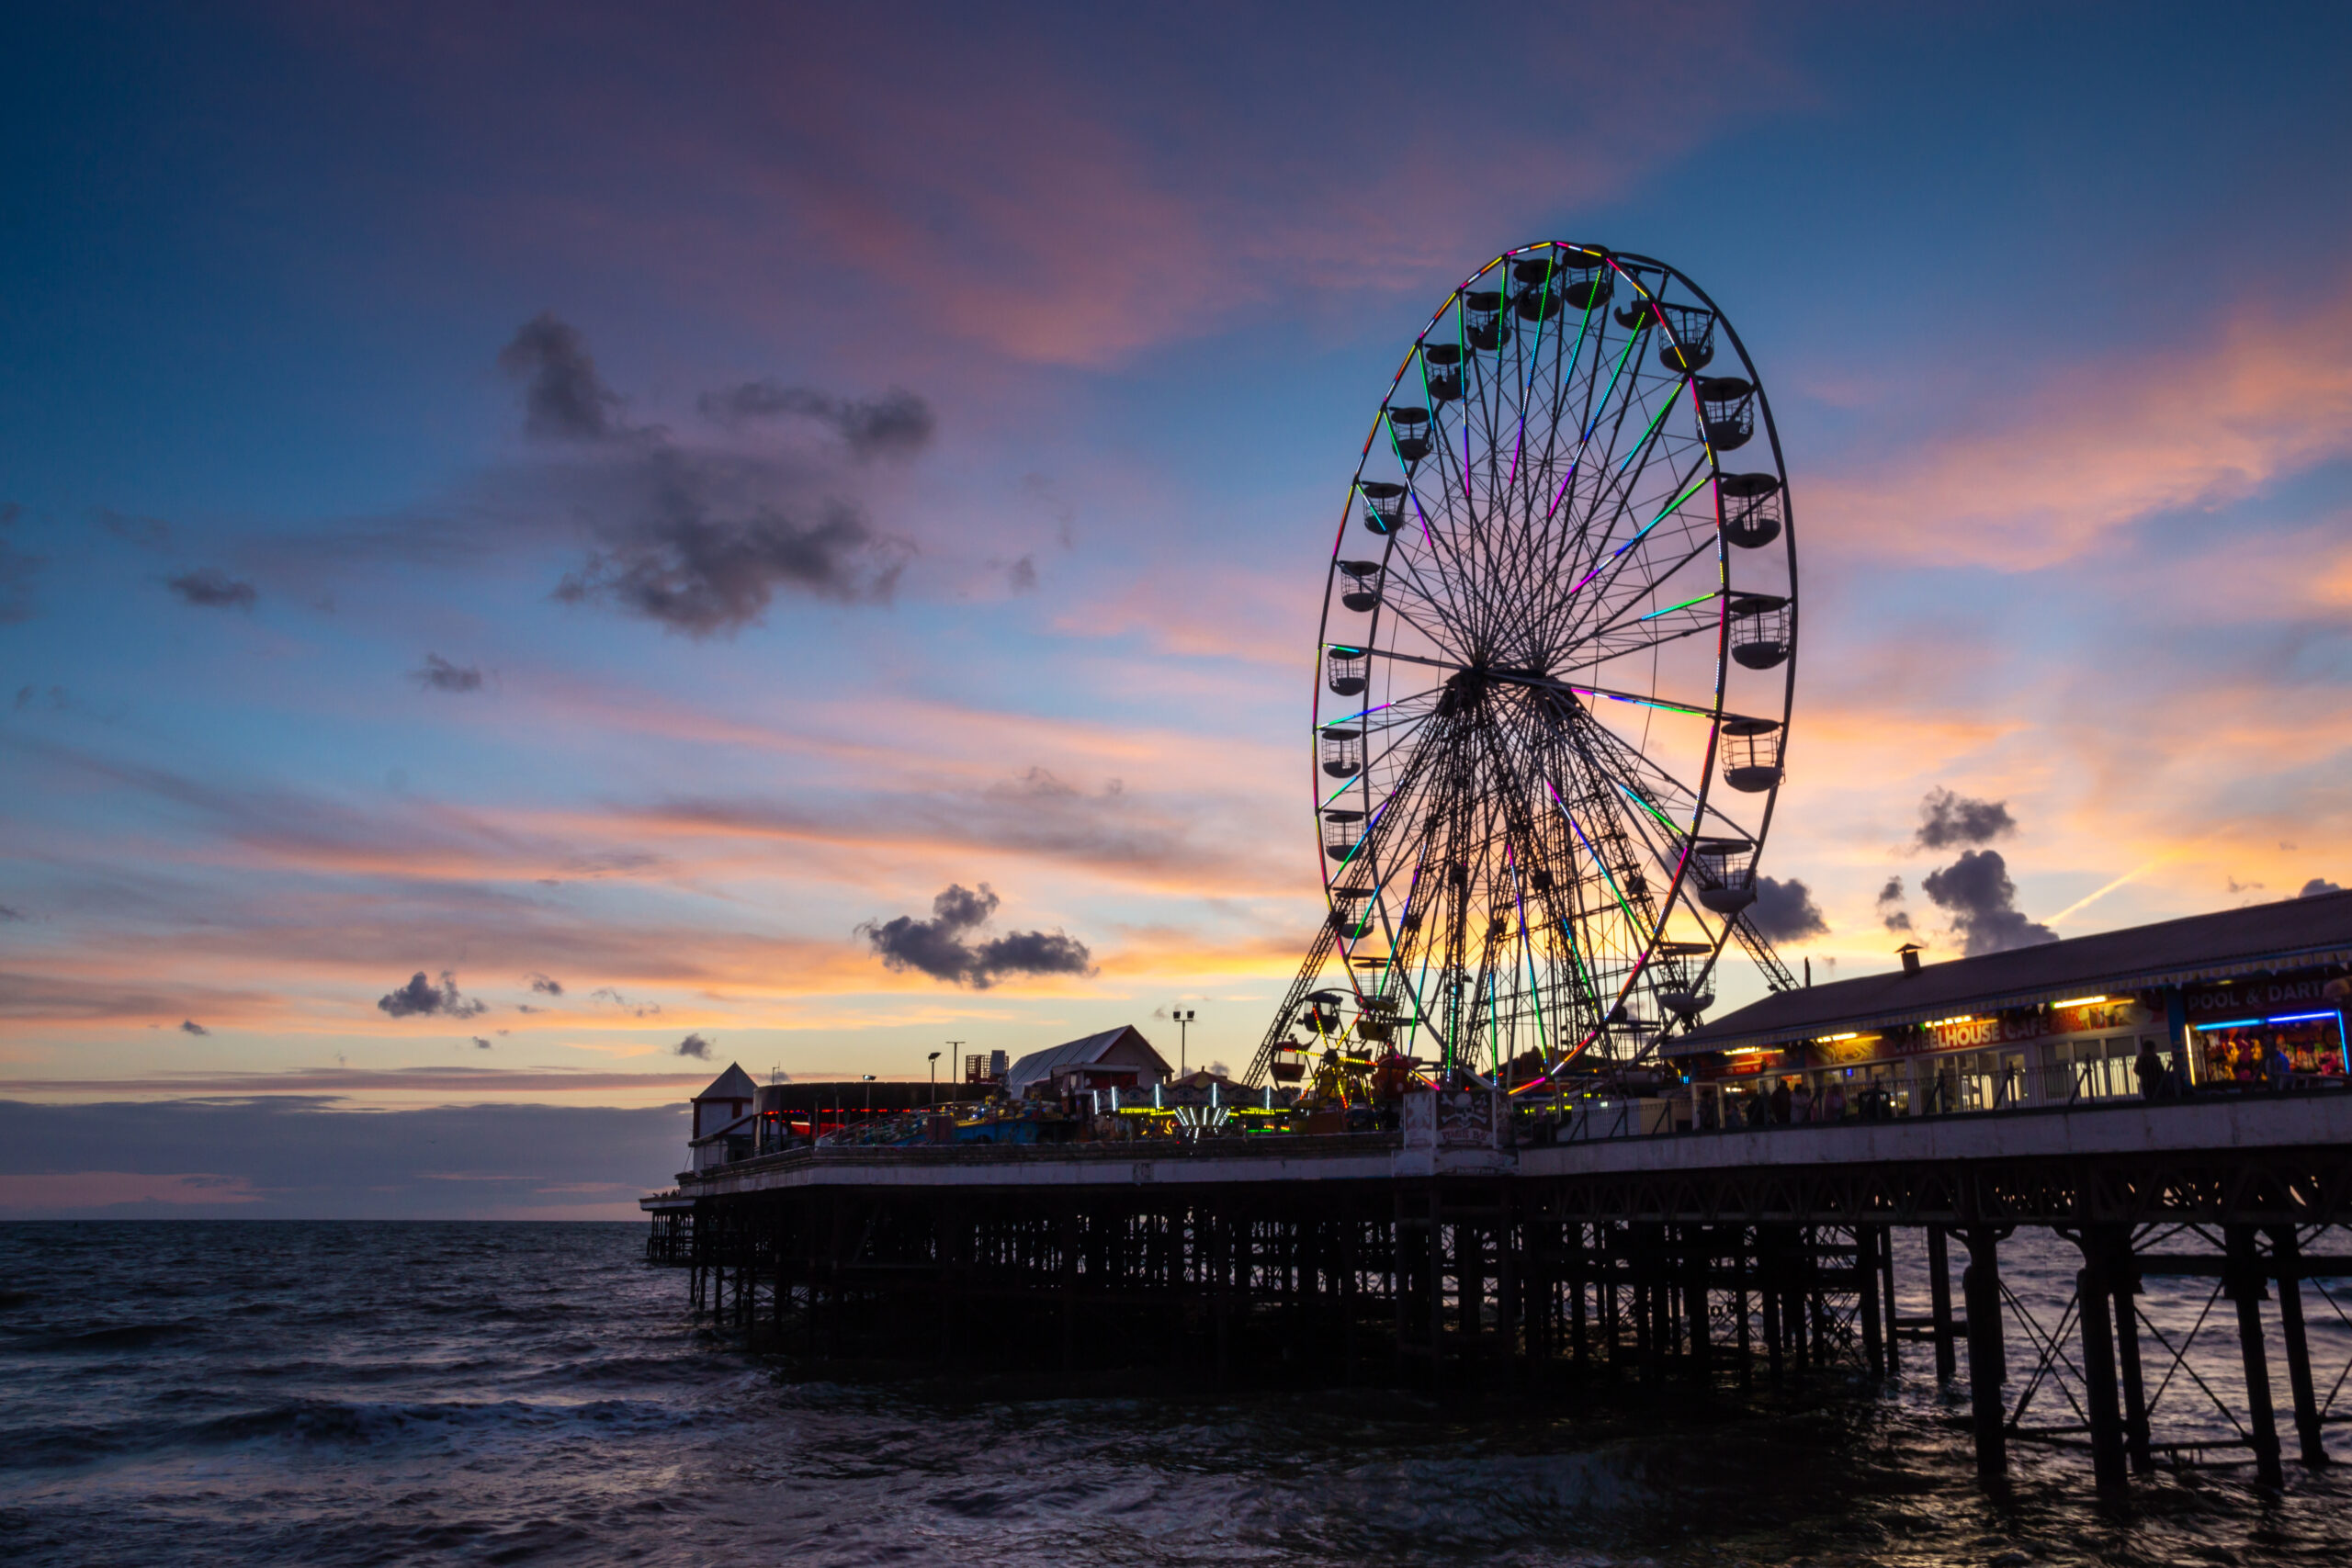 Image of the funfair pier in Blackpool where we provide Pat Testing